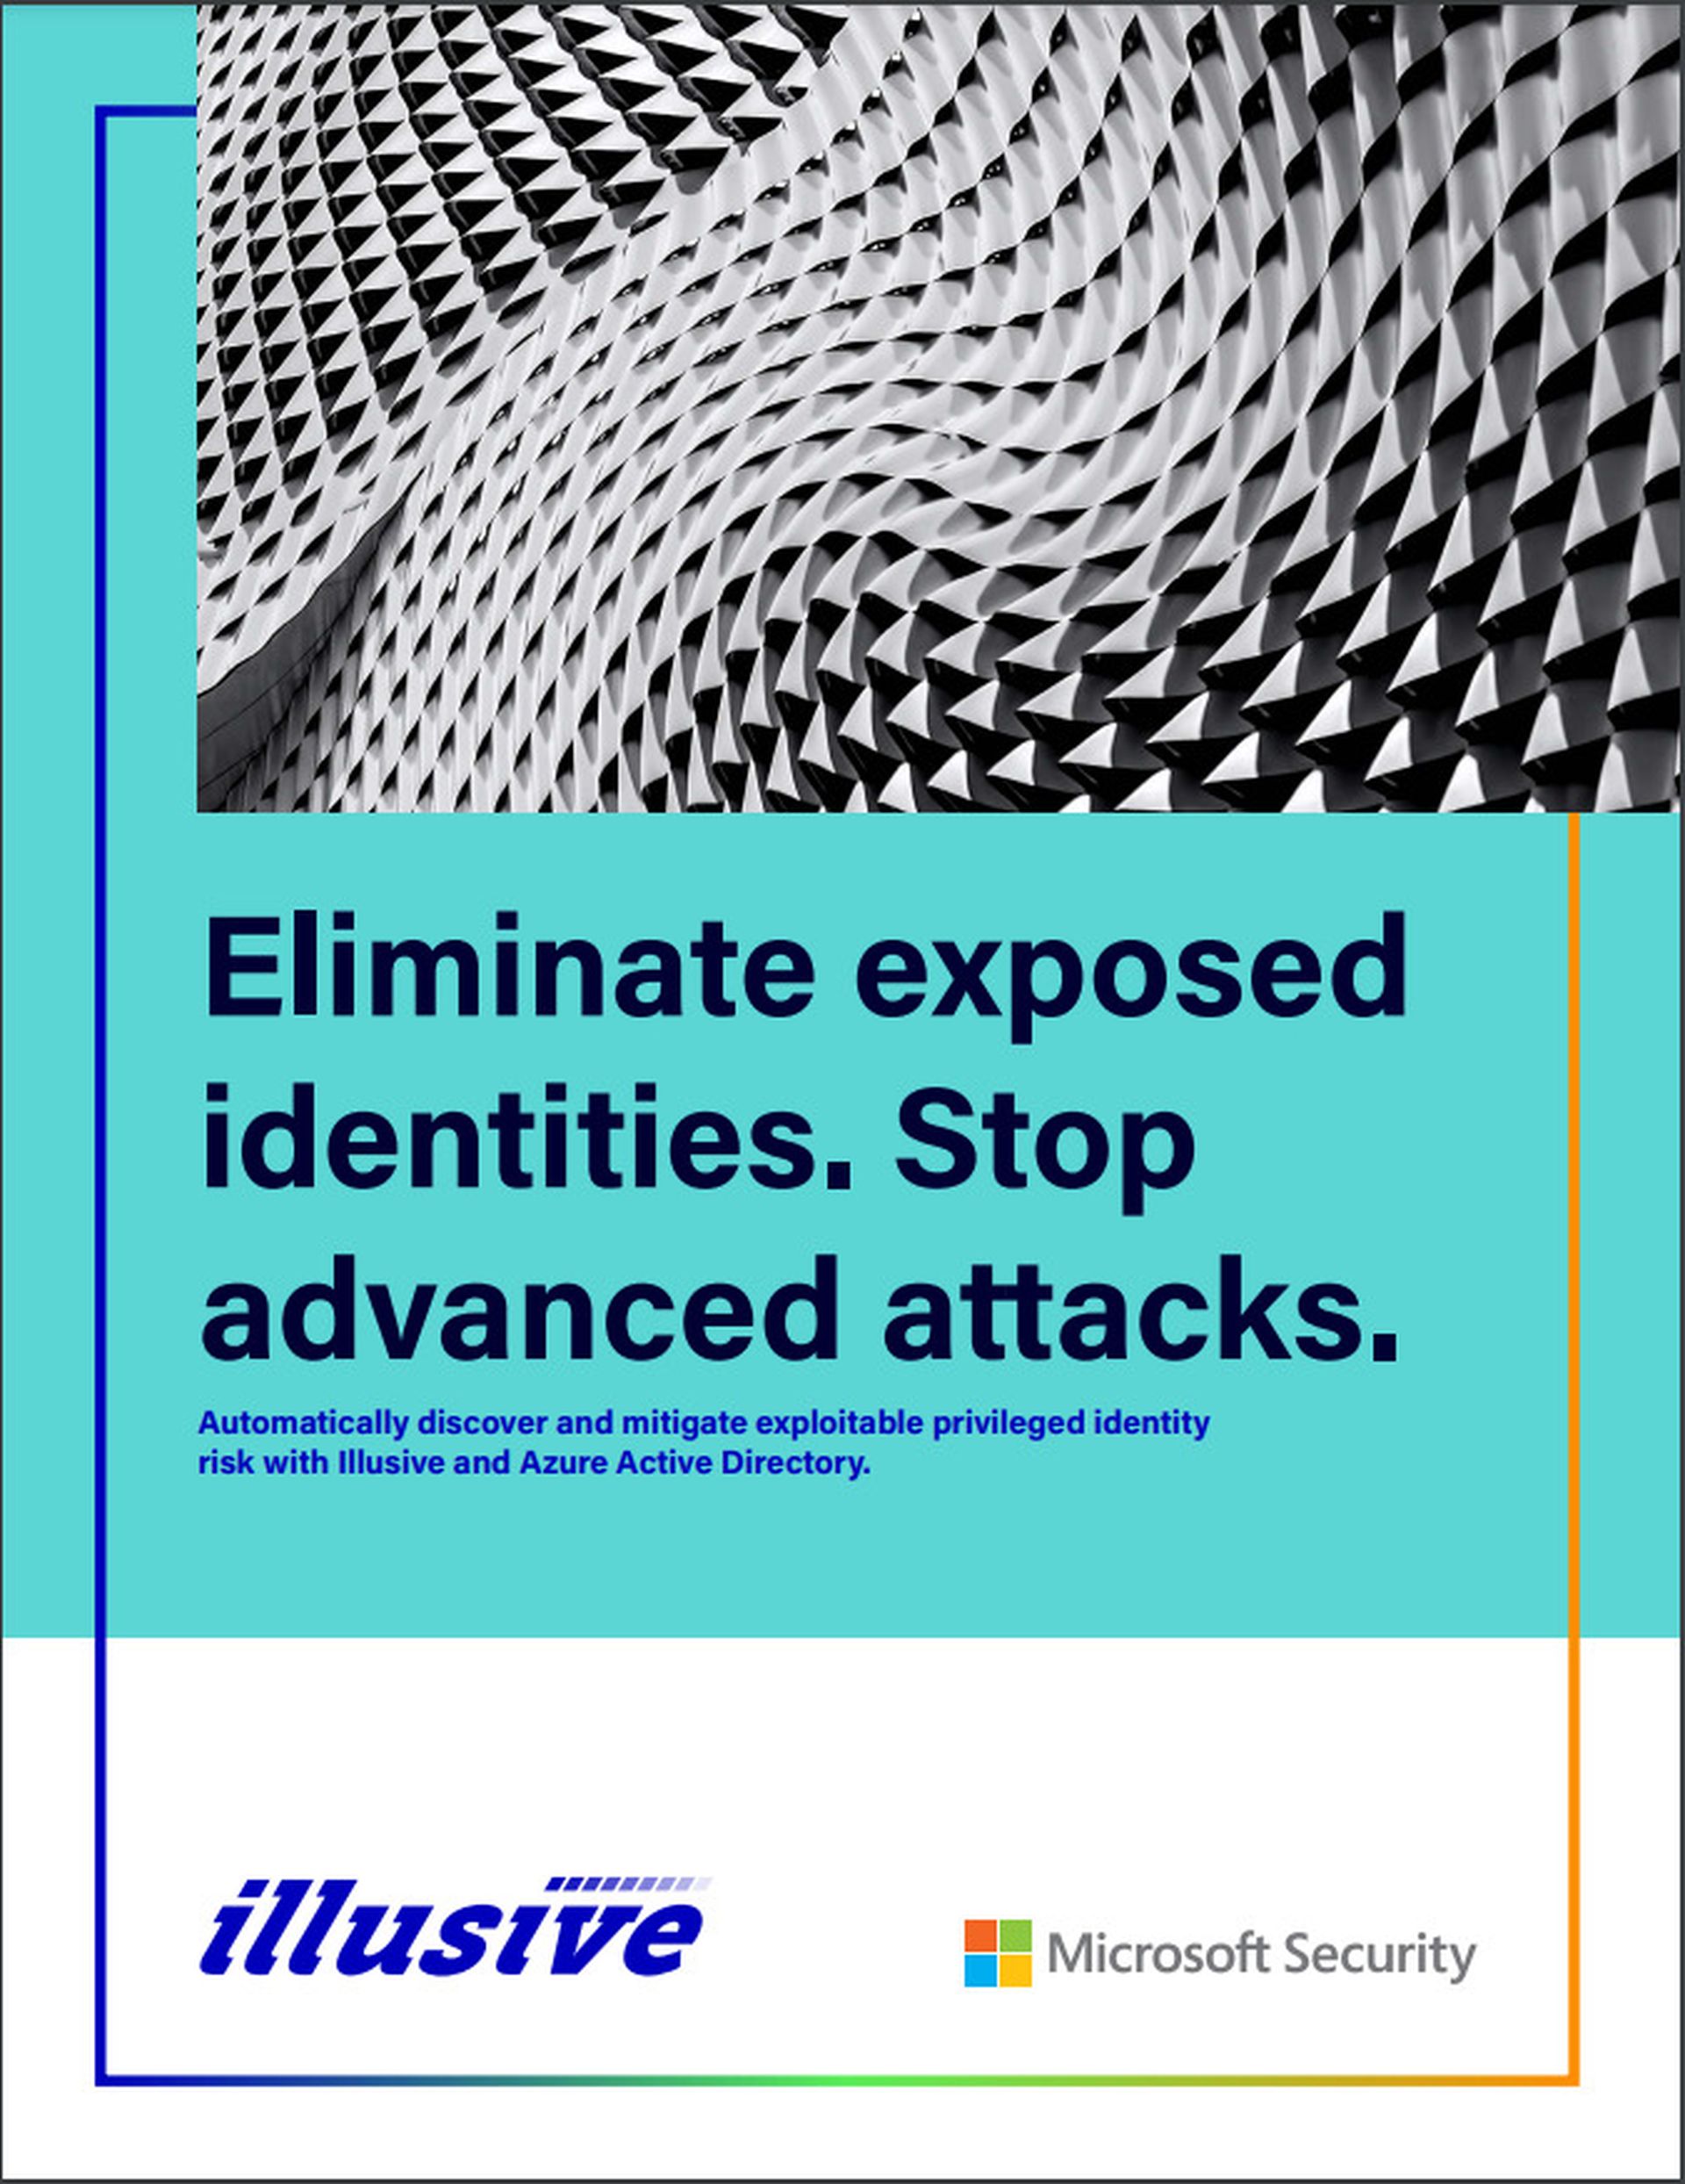 Enable industry-leading protection against ransomware attacks